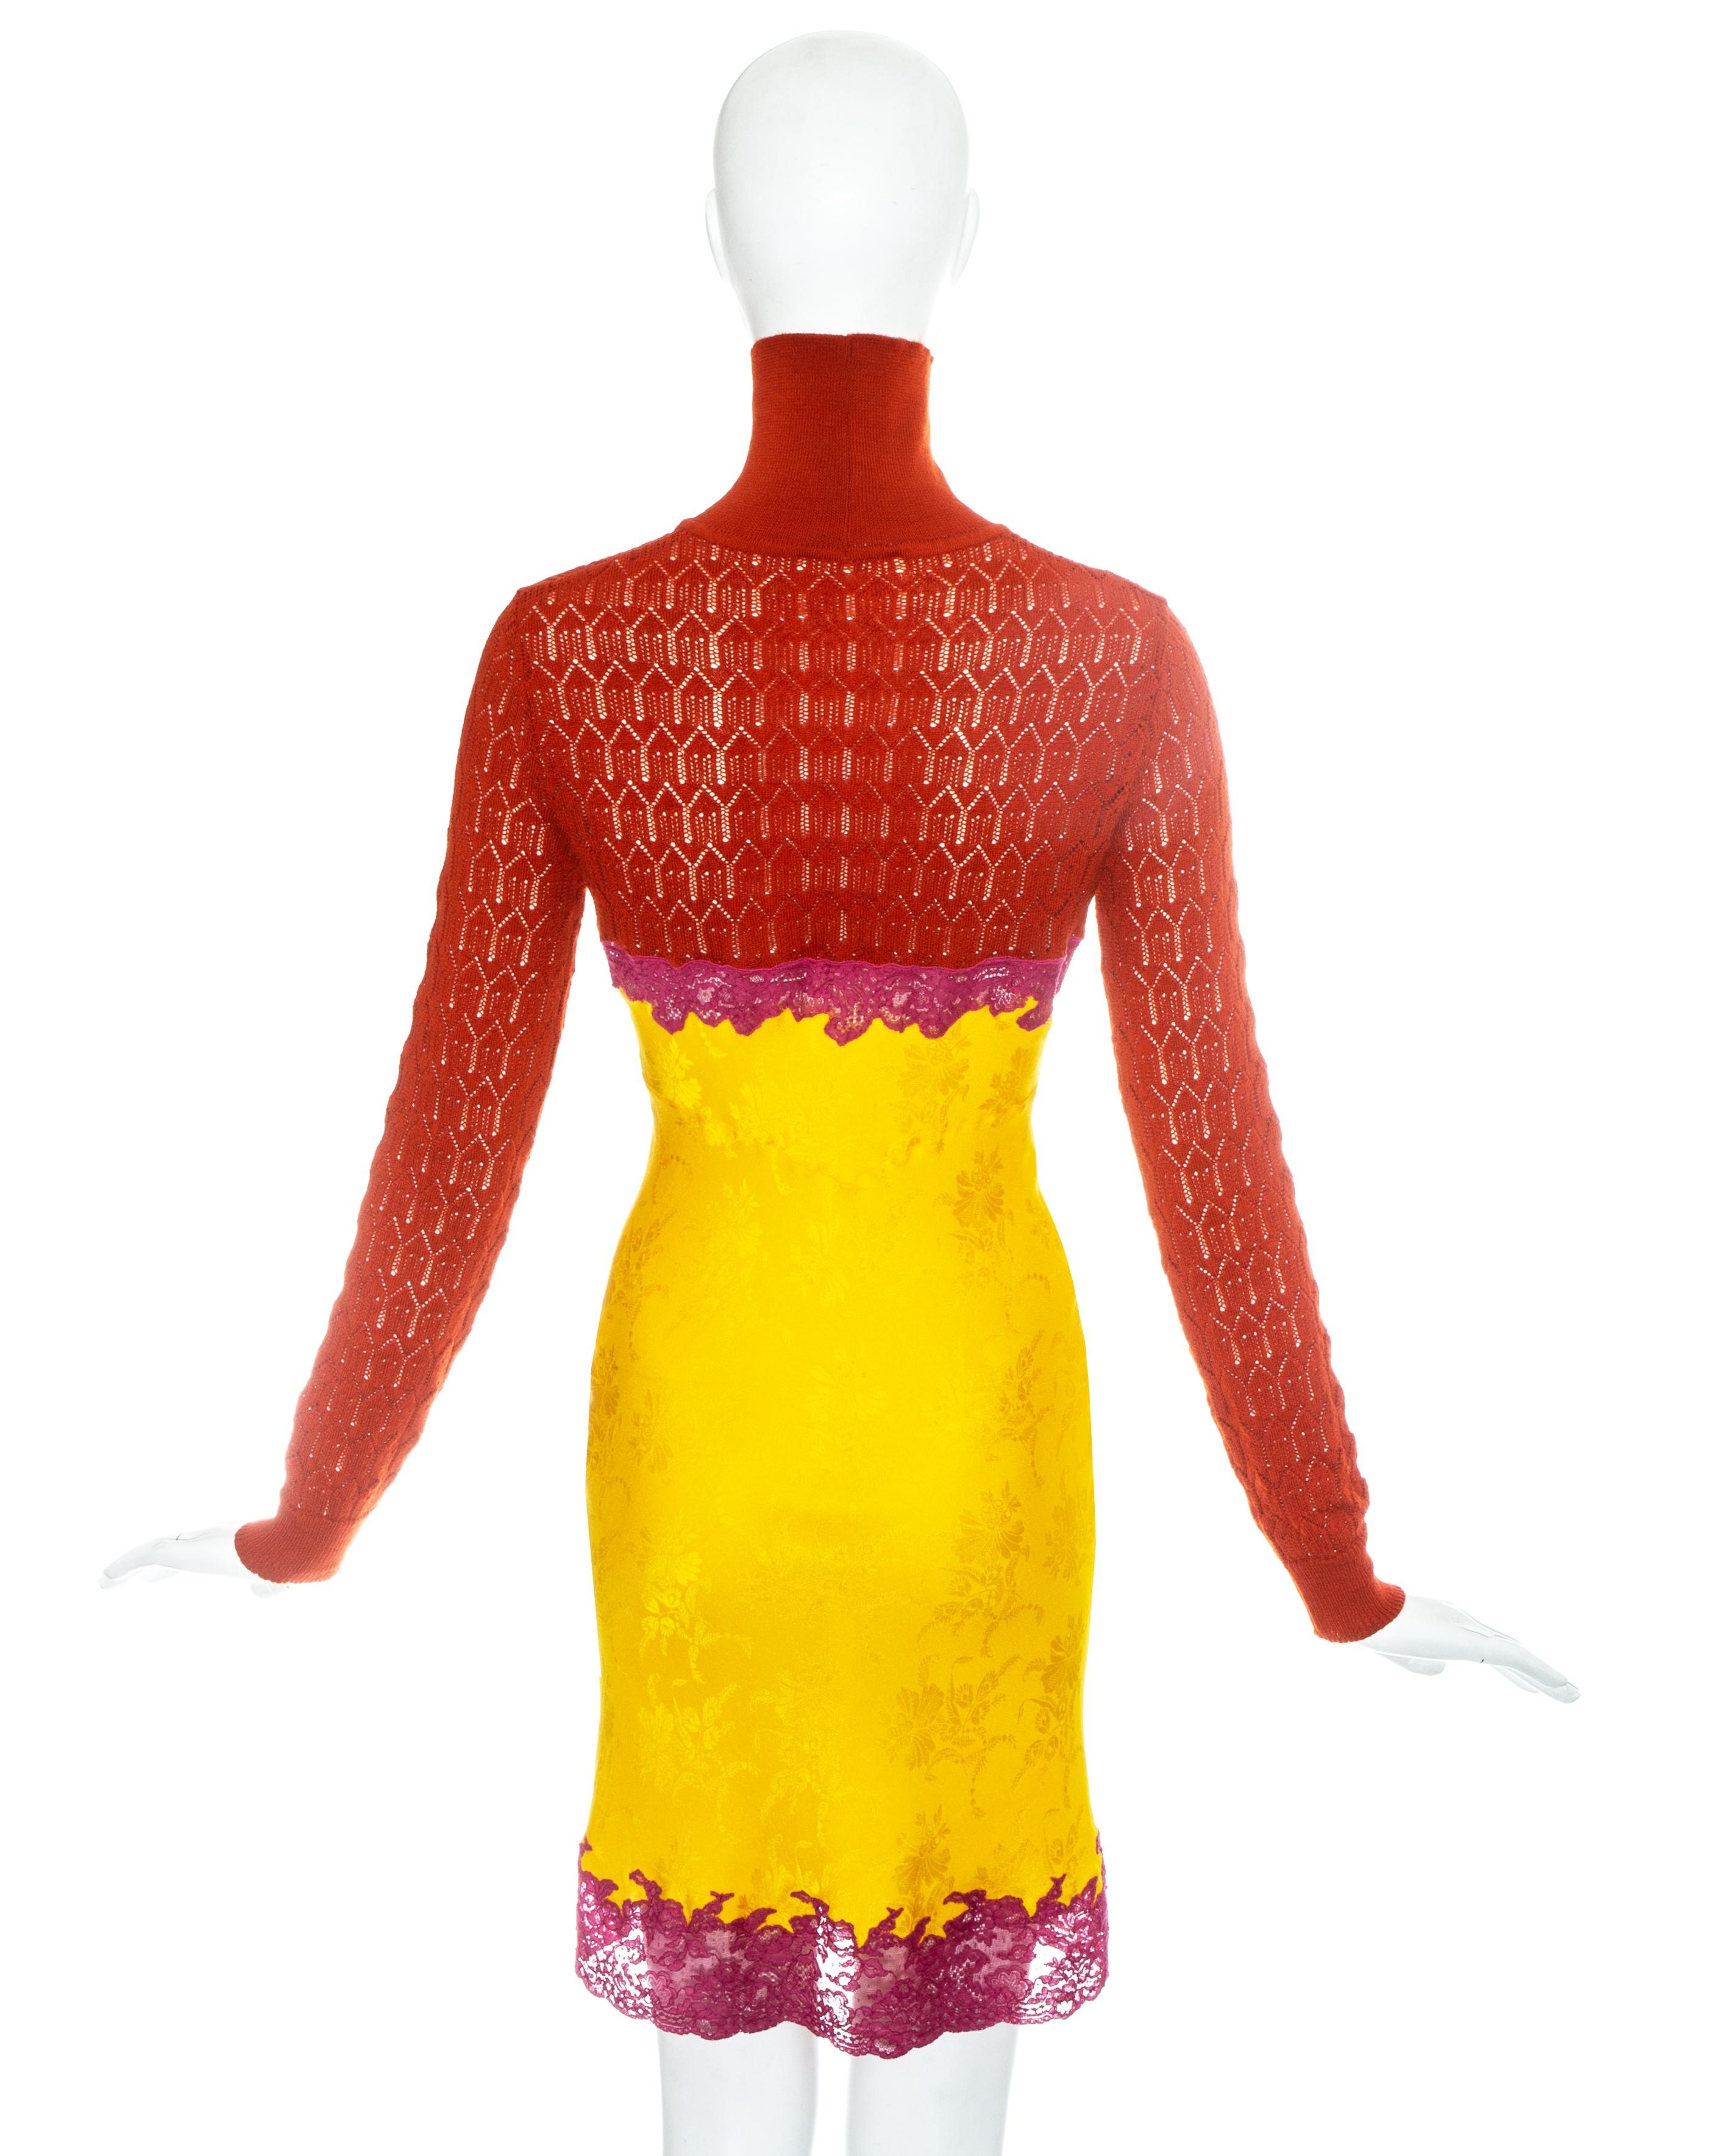 Christian Dior by John Galliano yellow and pink lace slip dress, fw 1998 In Excellent Condition For Sale In London, London